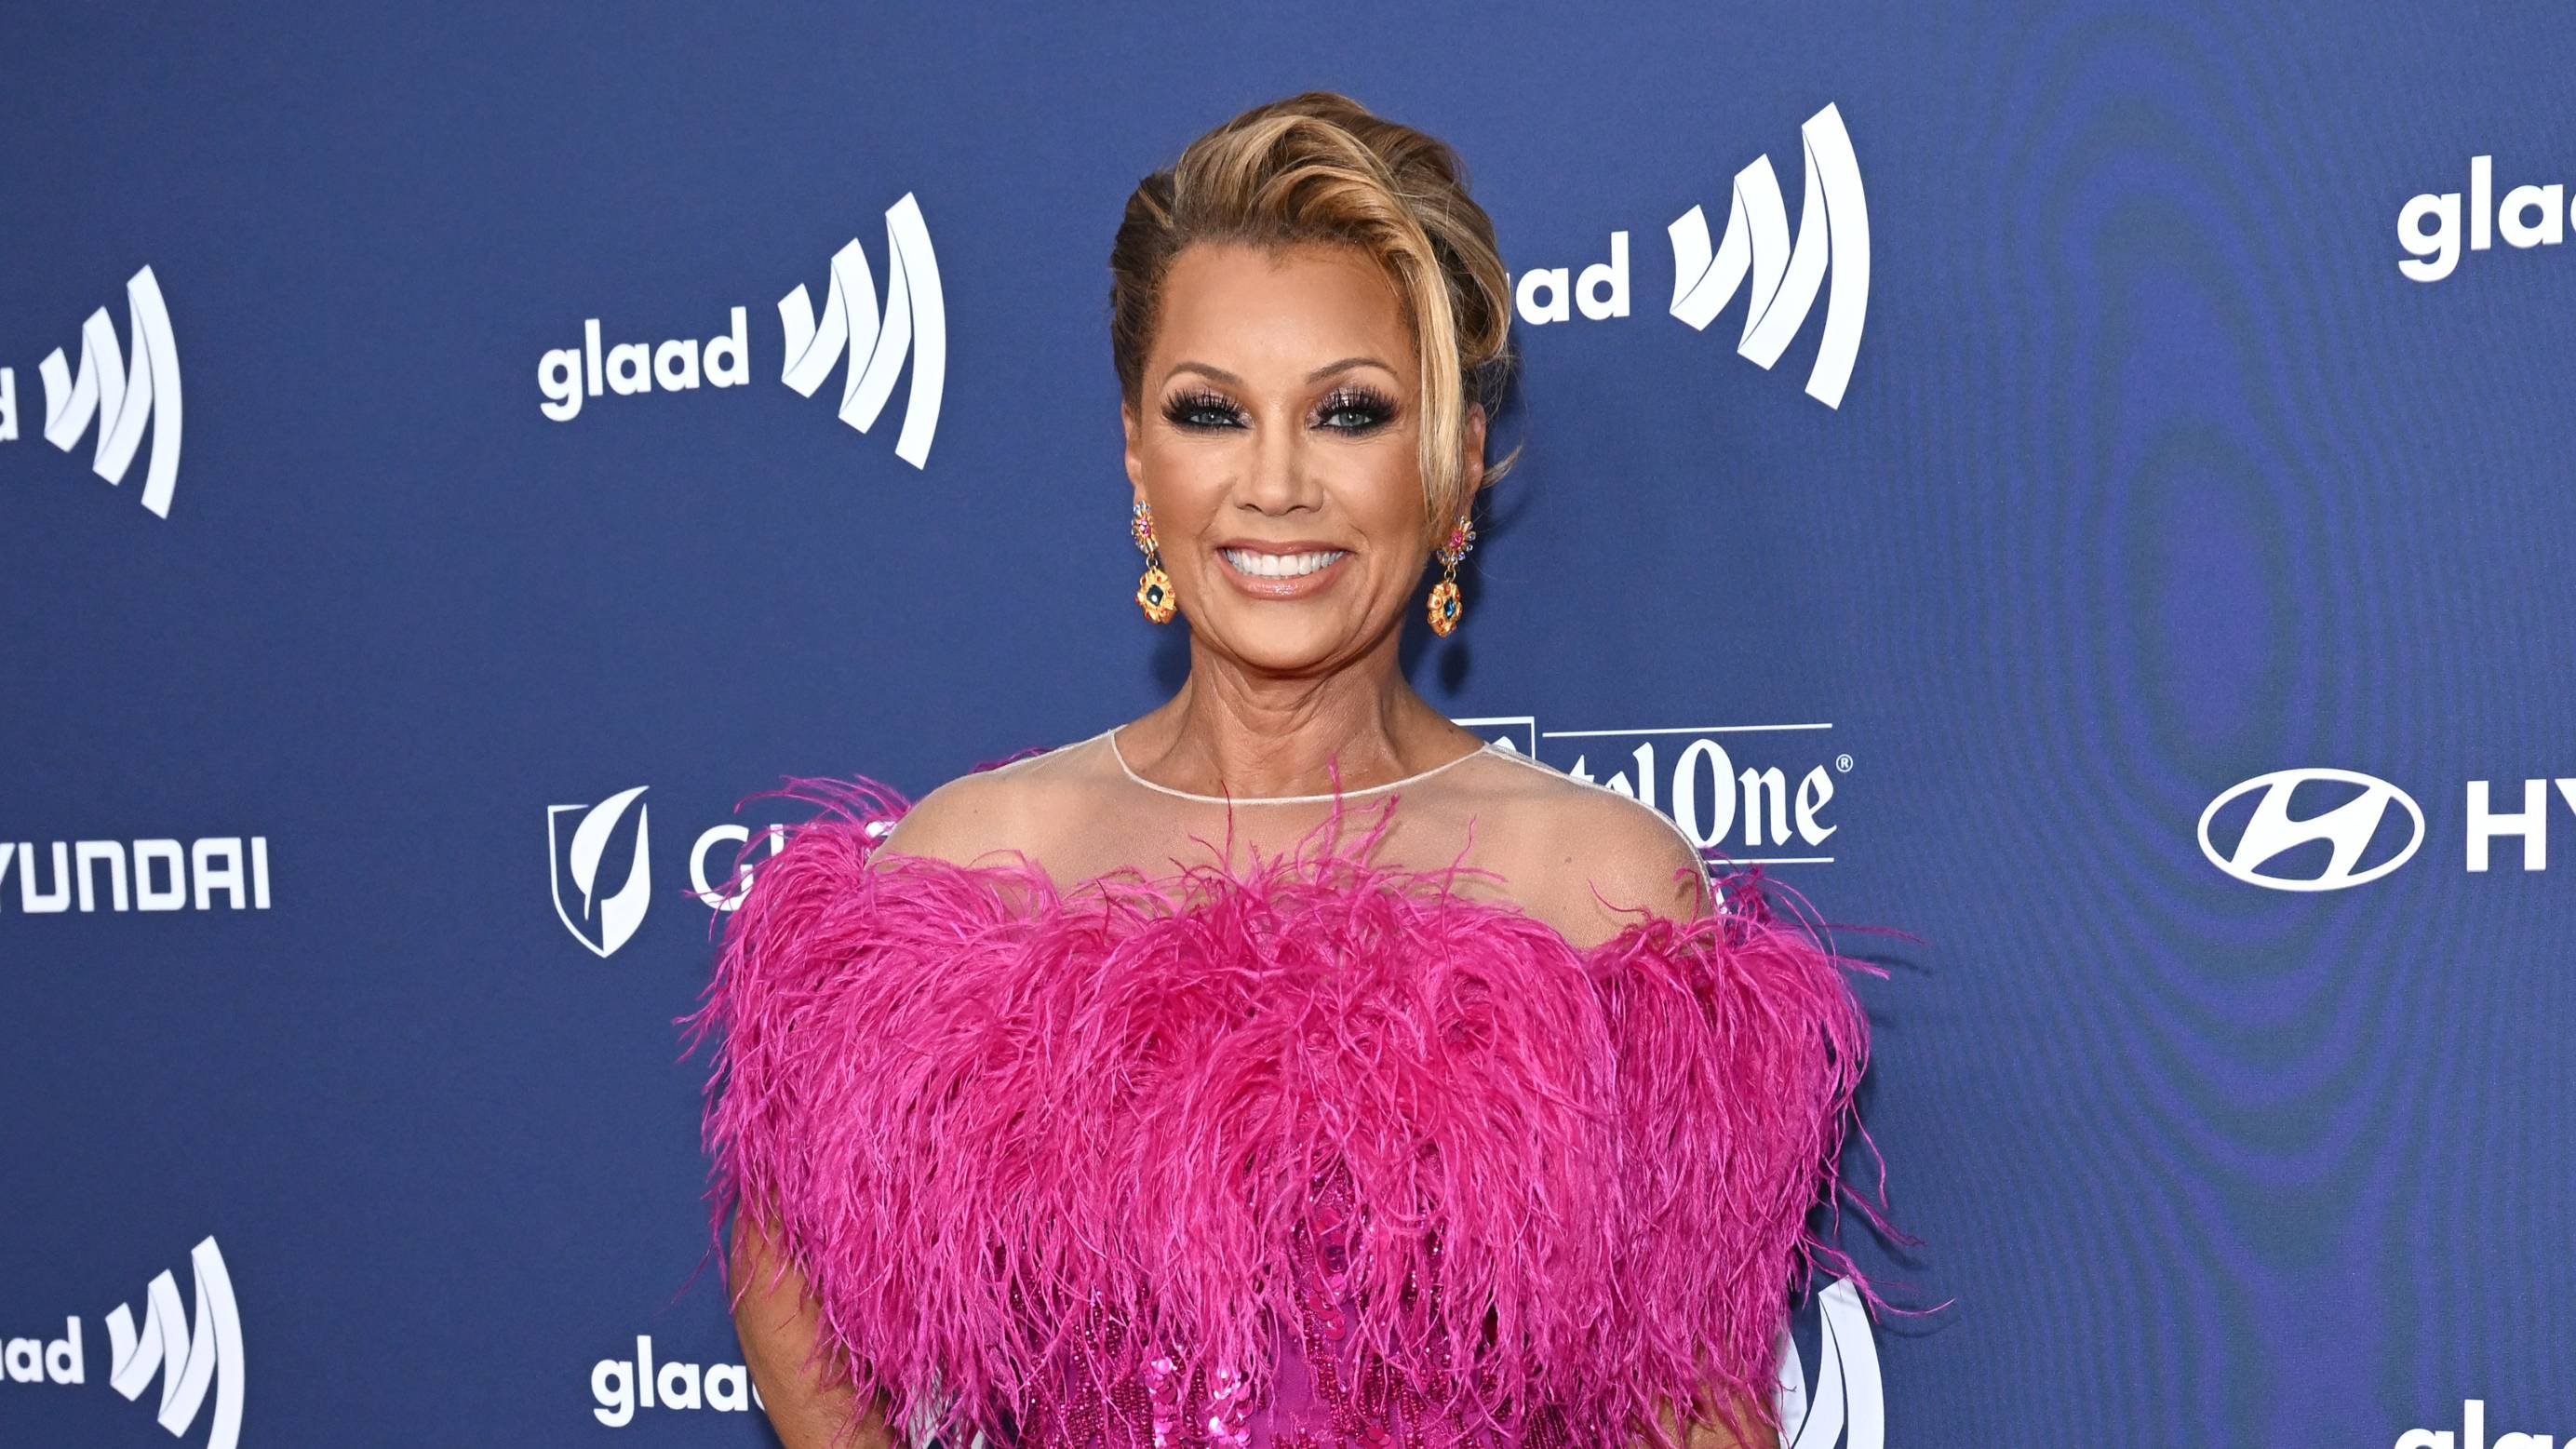 Vanessa Williams attends the 34th Annual GLAAD Media Awards Los Angeles at The Beverly Hilton on March 30, 2023 in Beverly Hills, California.